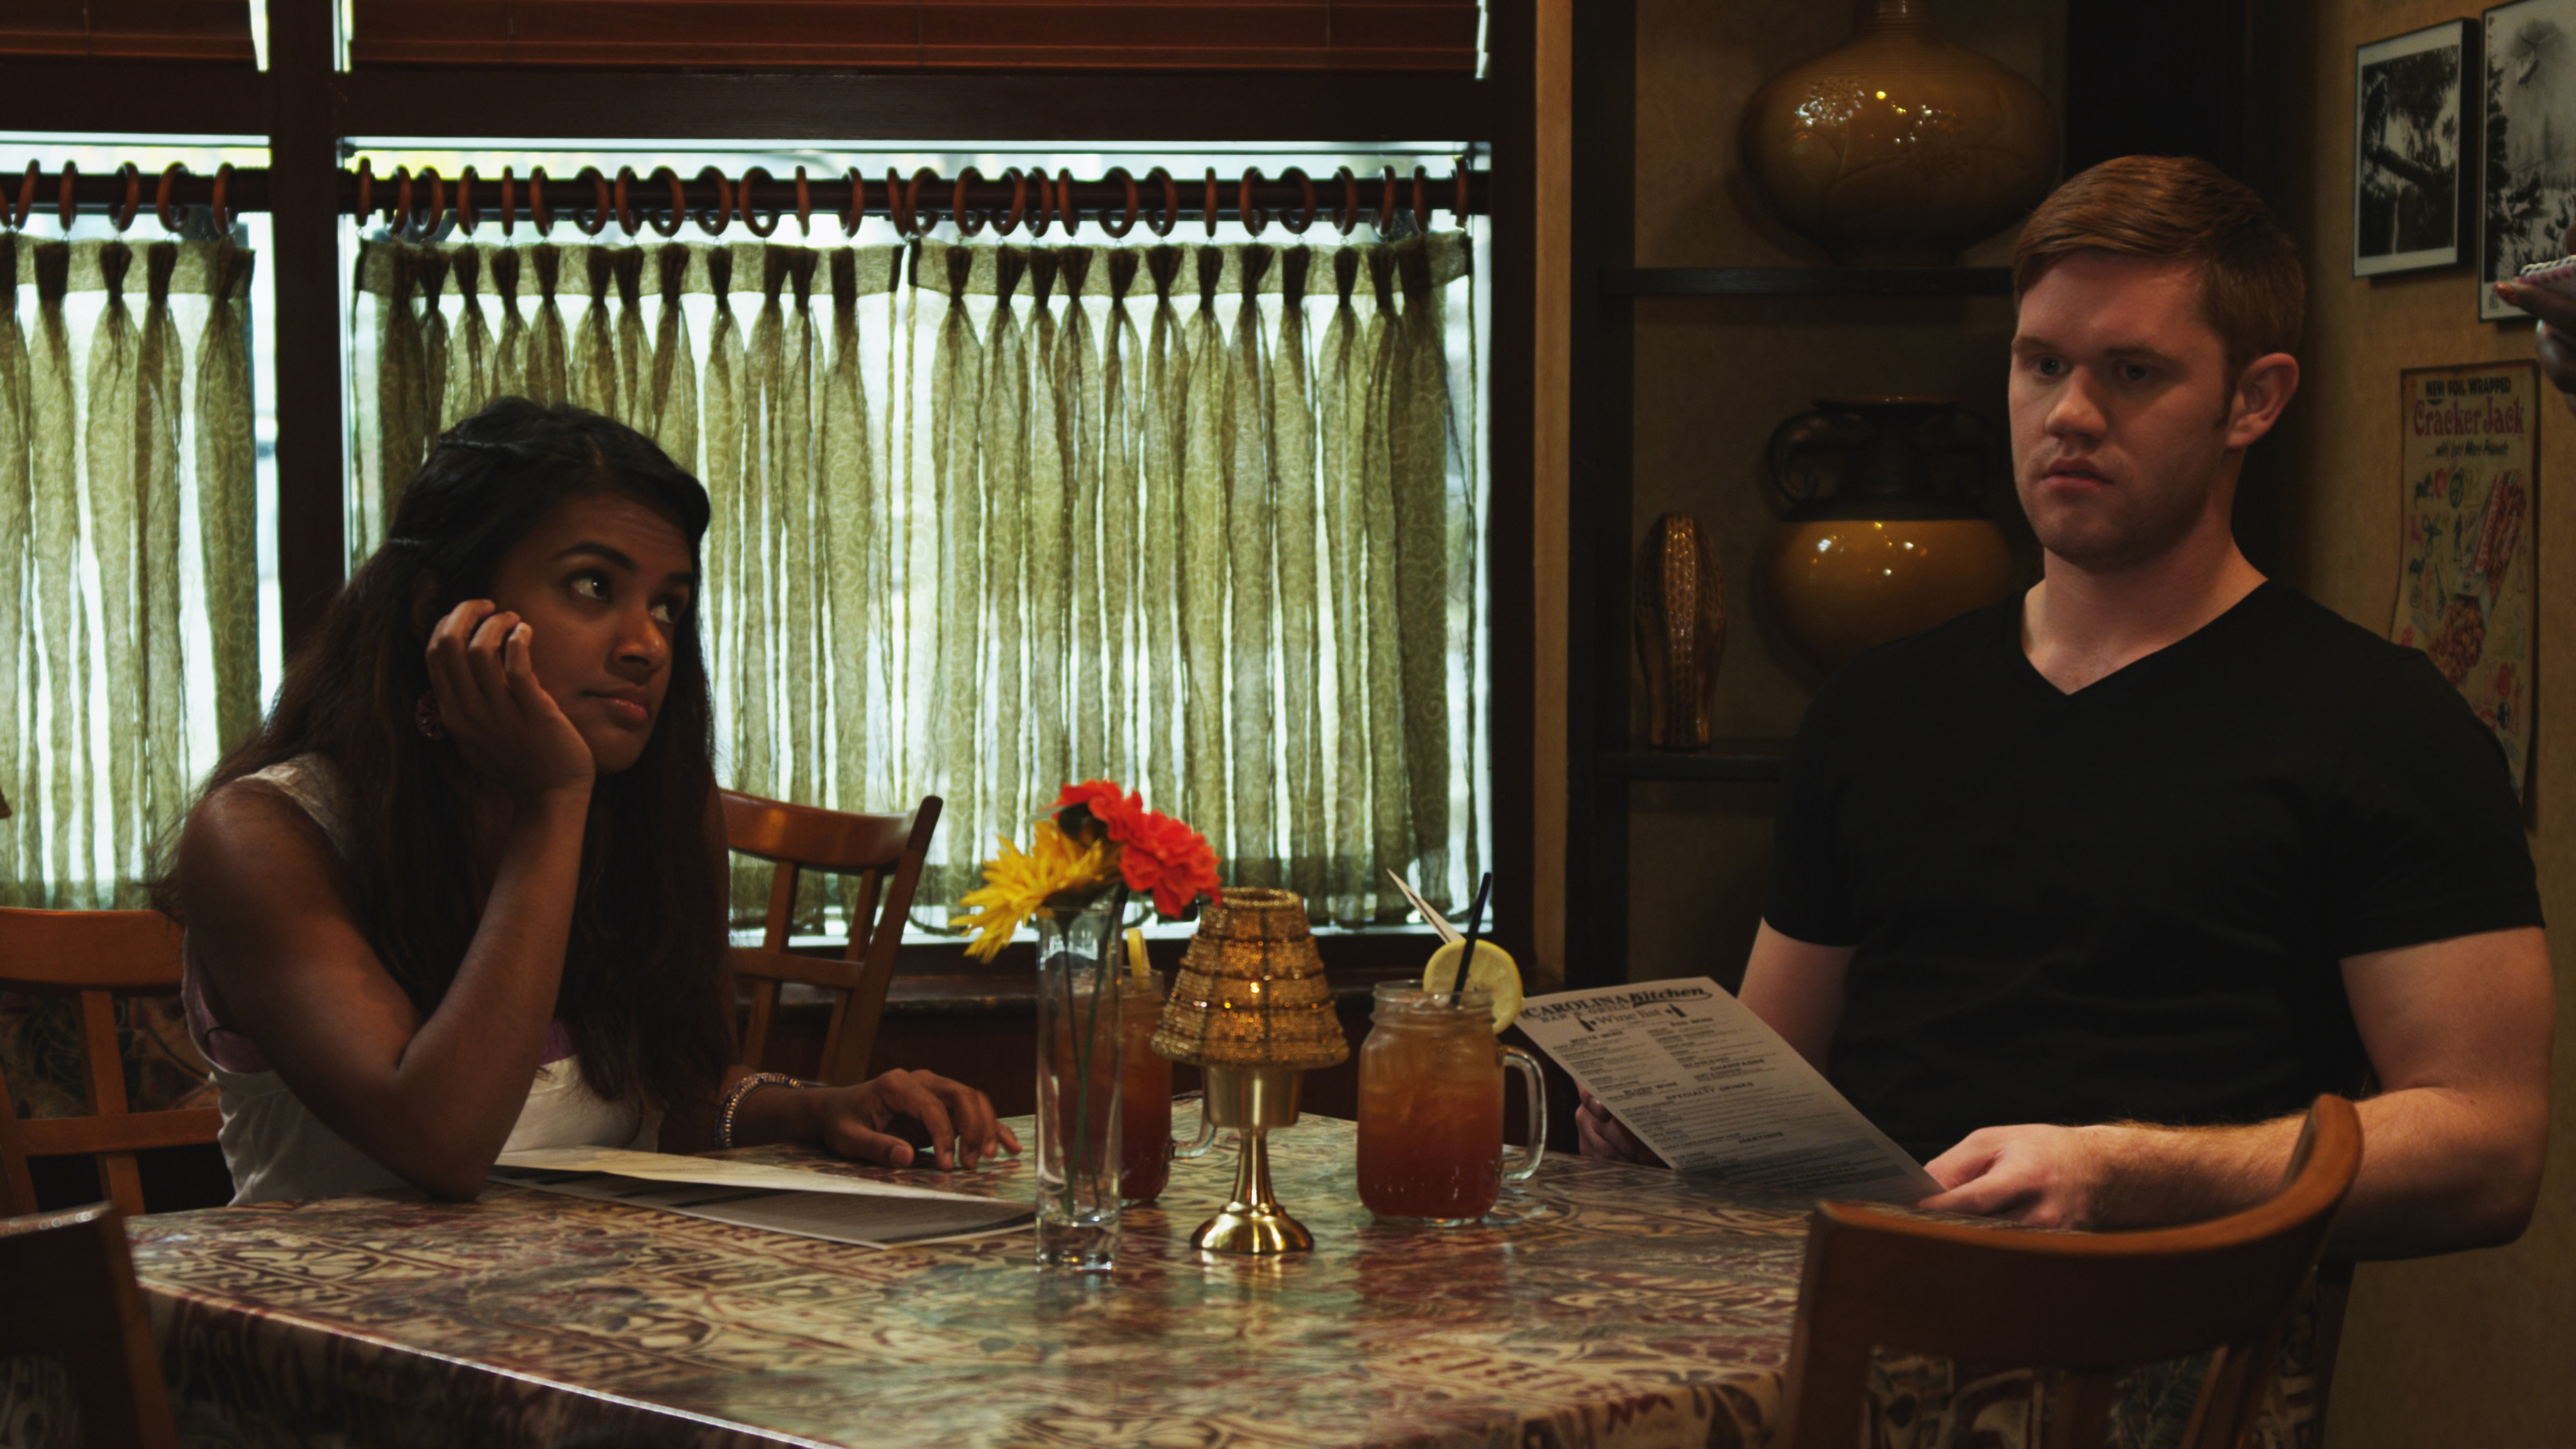 From left to right: Sharanya Ravi (Sunita), James Poole (Paddy) in the scene of their first date.